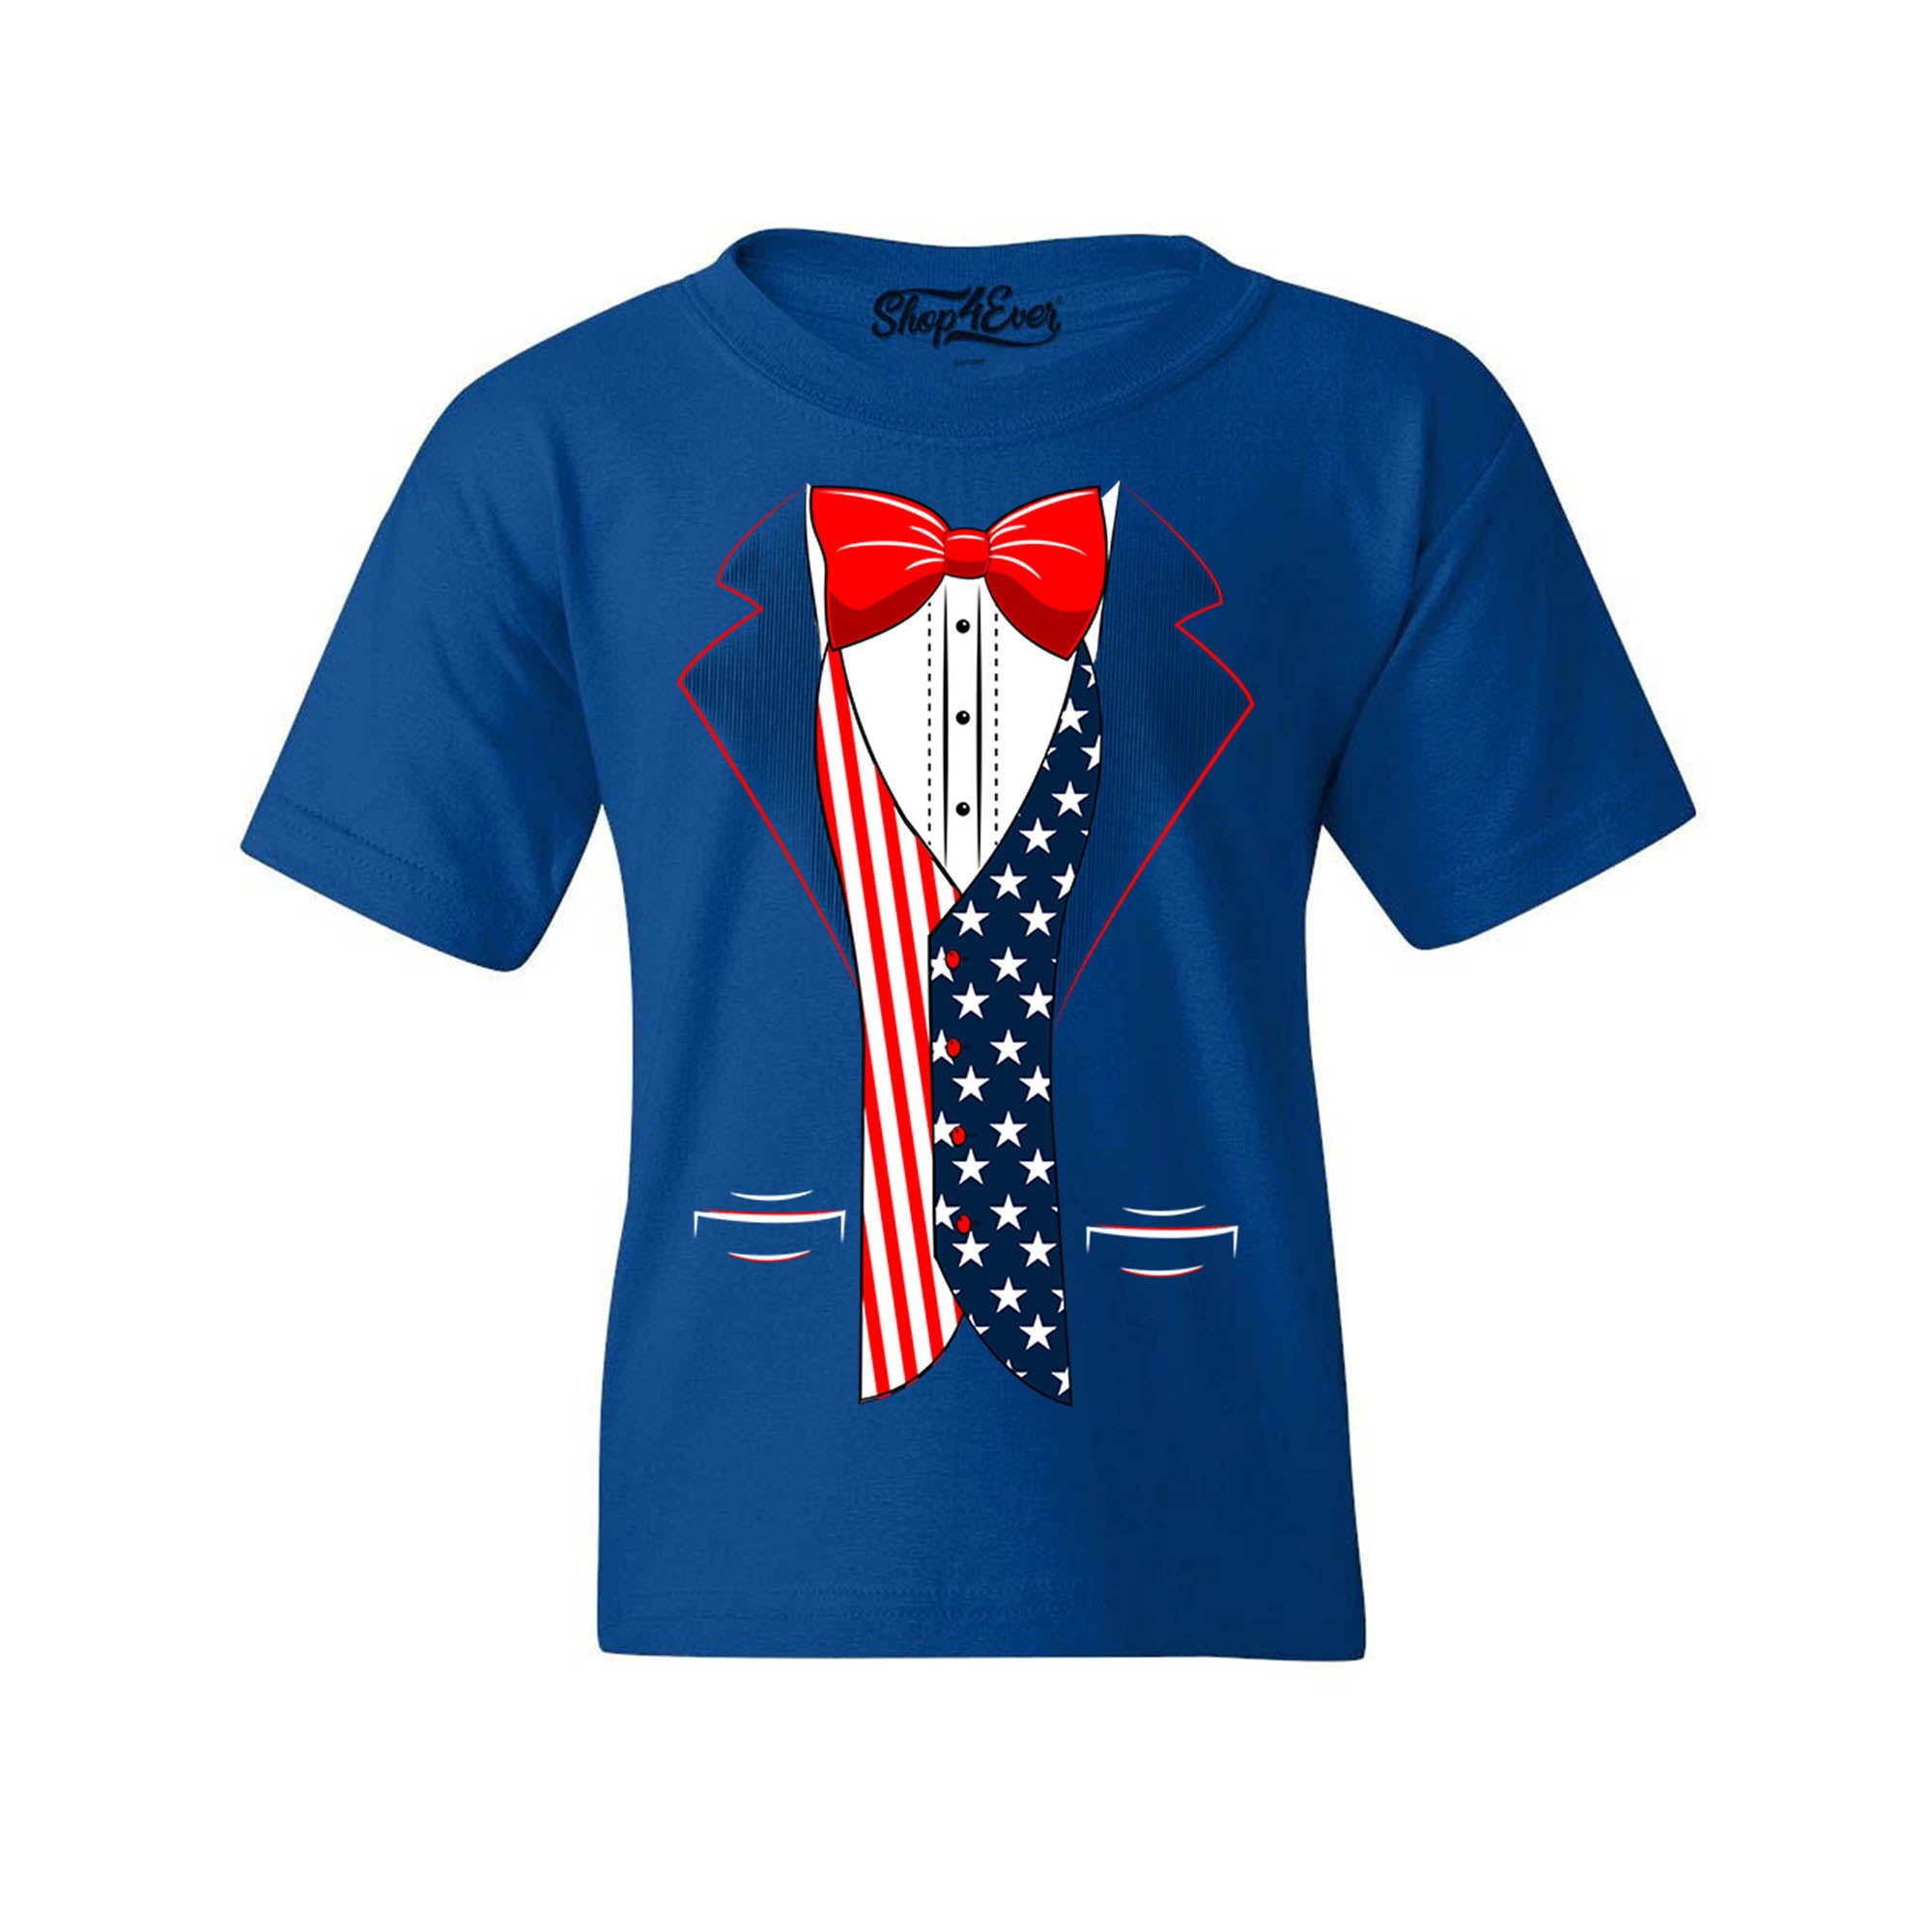 4th of July USA Tuxedo American Flag Youth's T-Shirt Youth